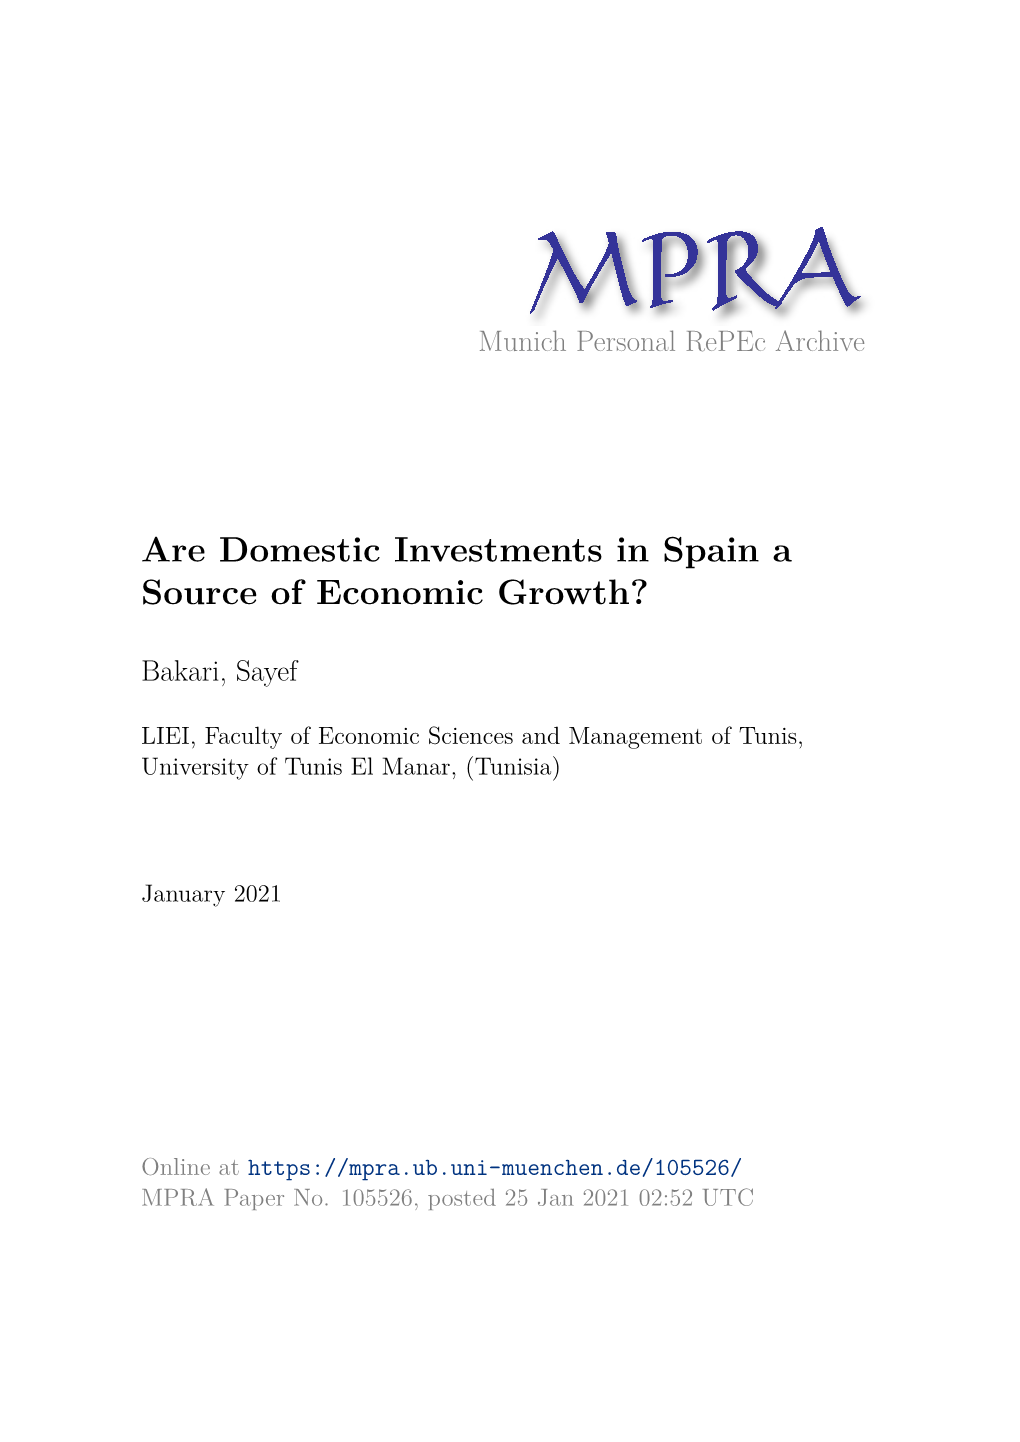 Are Domestic Investments in Spain a Source of Economic Growth?